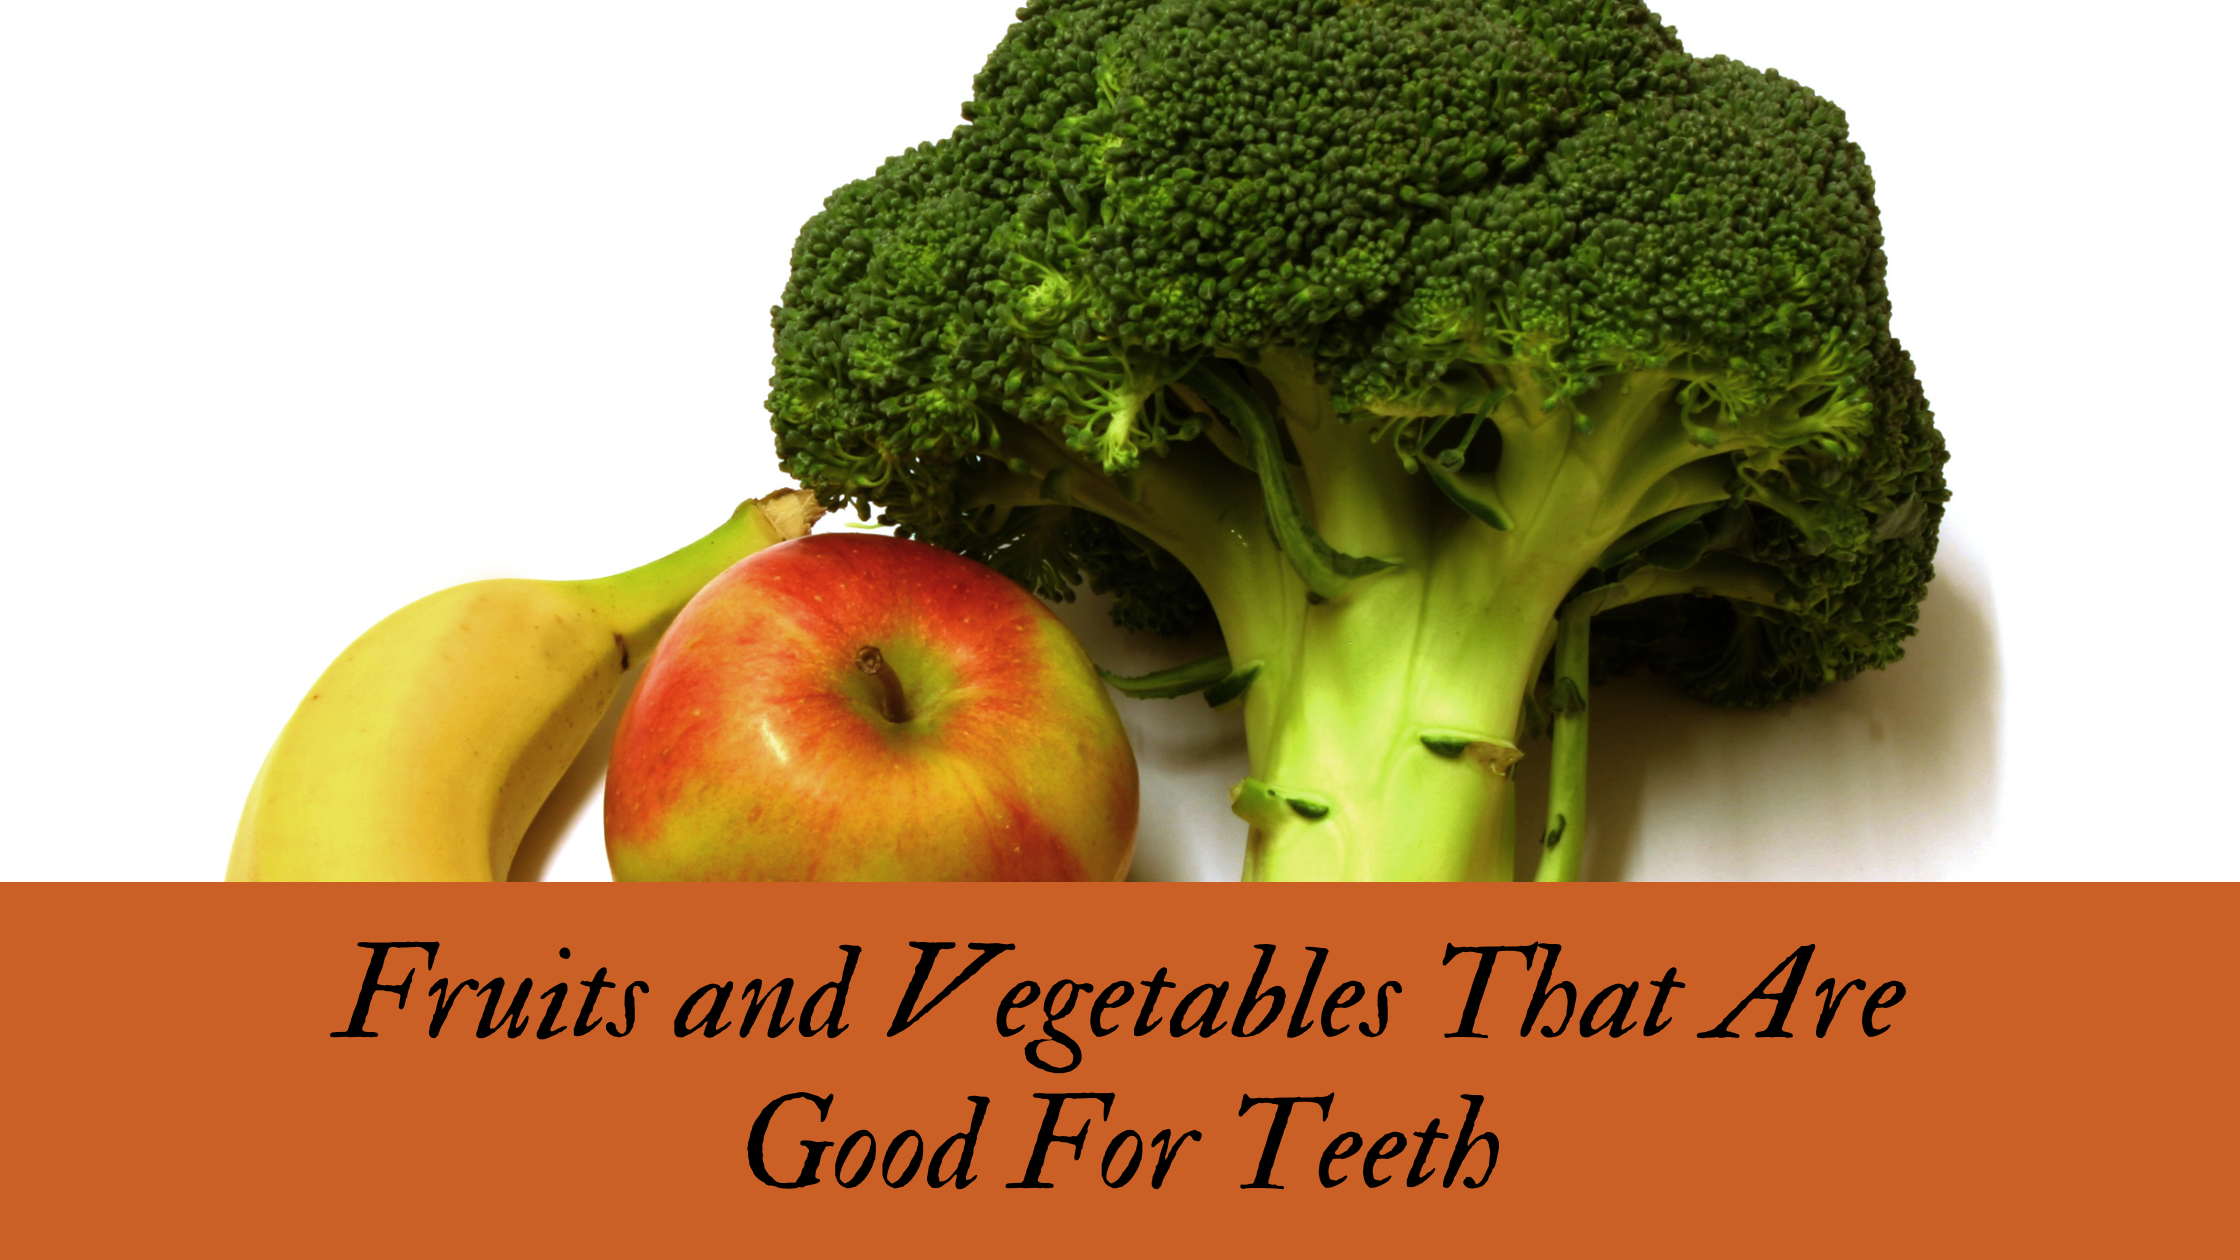 Fruits-and-Vegetables-That-Are-Good-For-Teeth